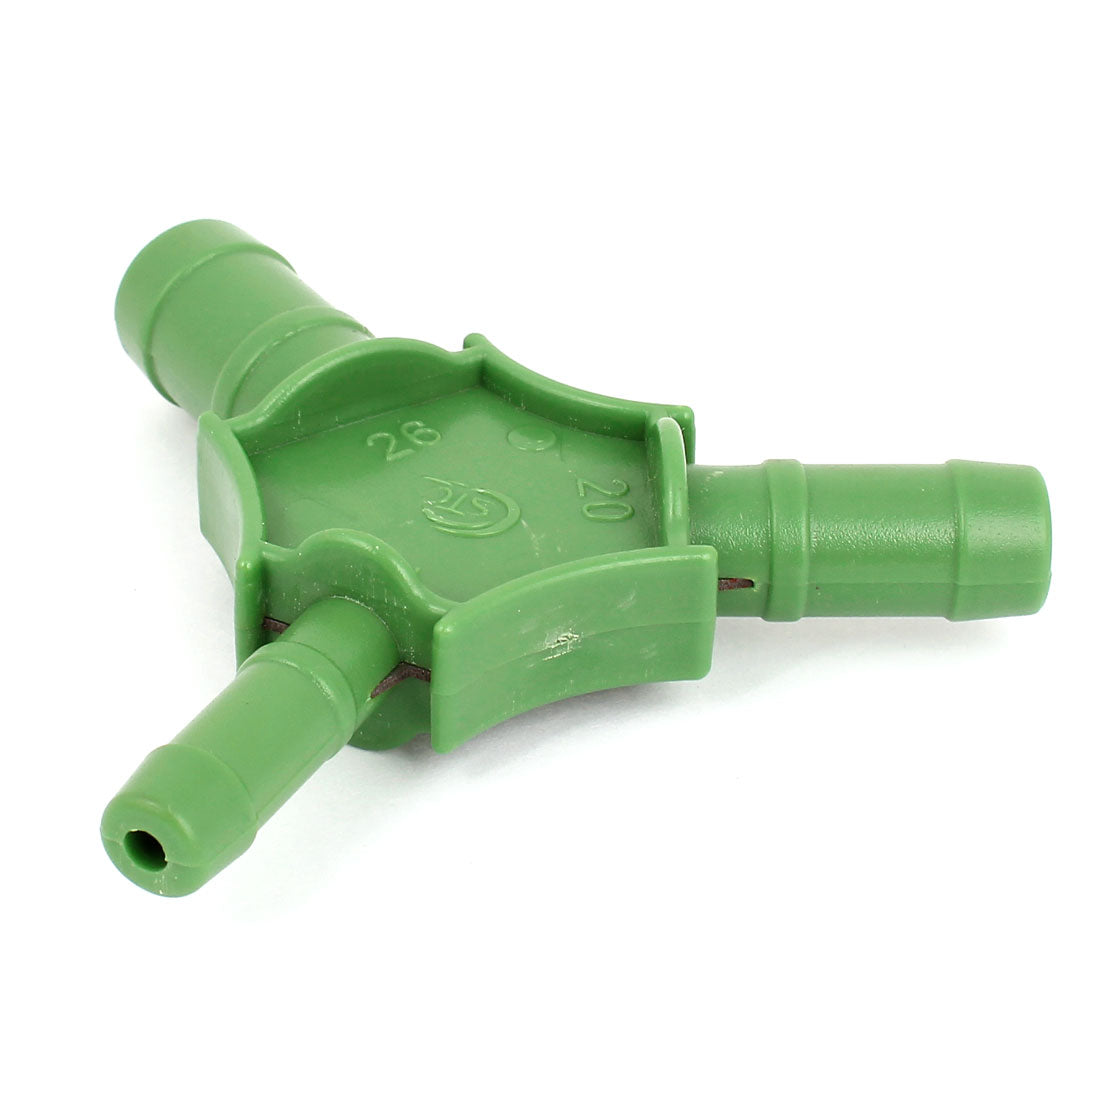 uxcell Uxcell Green PEX-AL Pex Pipe Reamer Cutter Tool for 12mm 16mm 20mm Tubing Plumbing